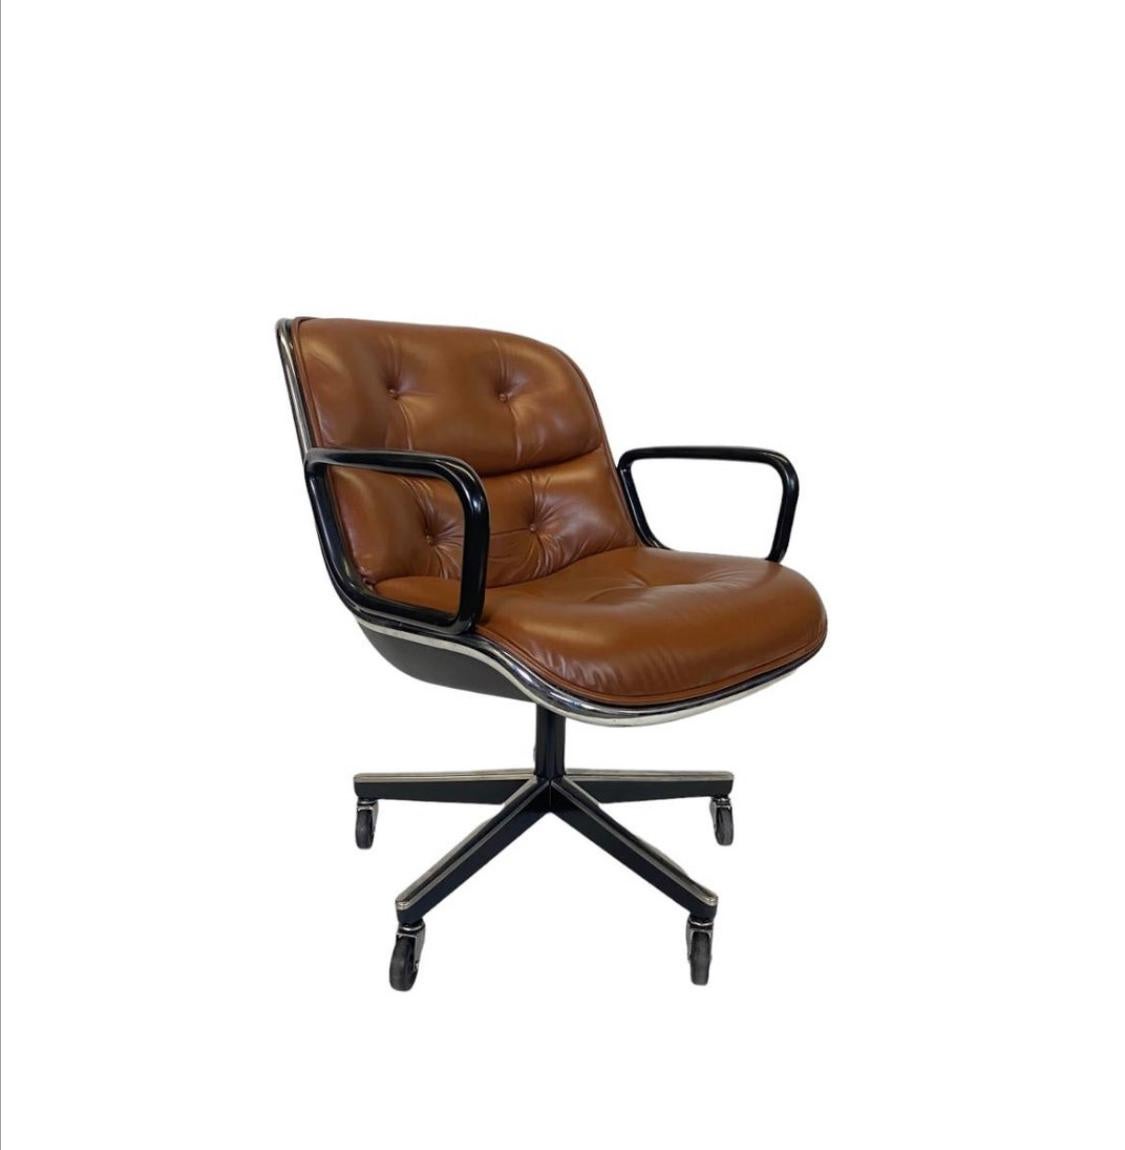 Pollock Executive Desk Chair in Brown Leather 1